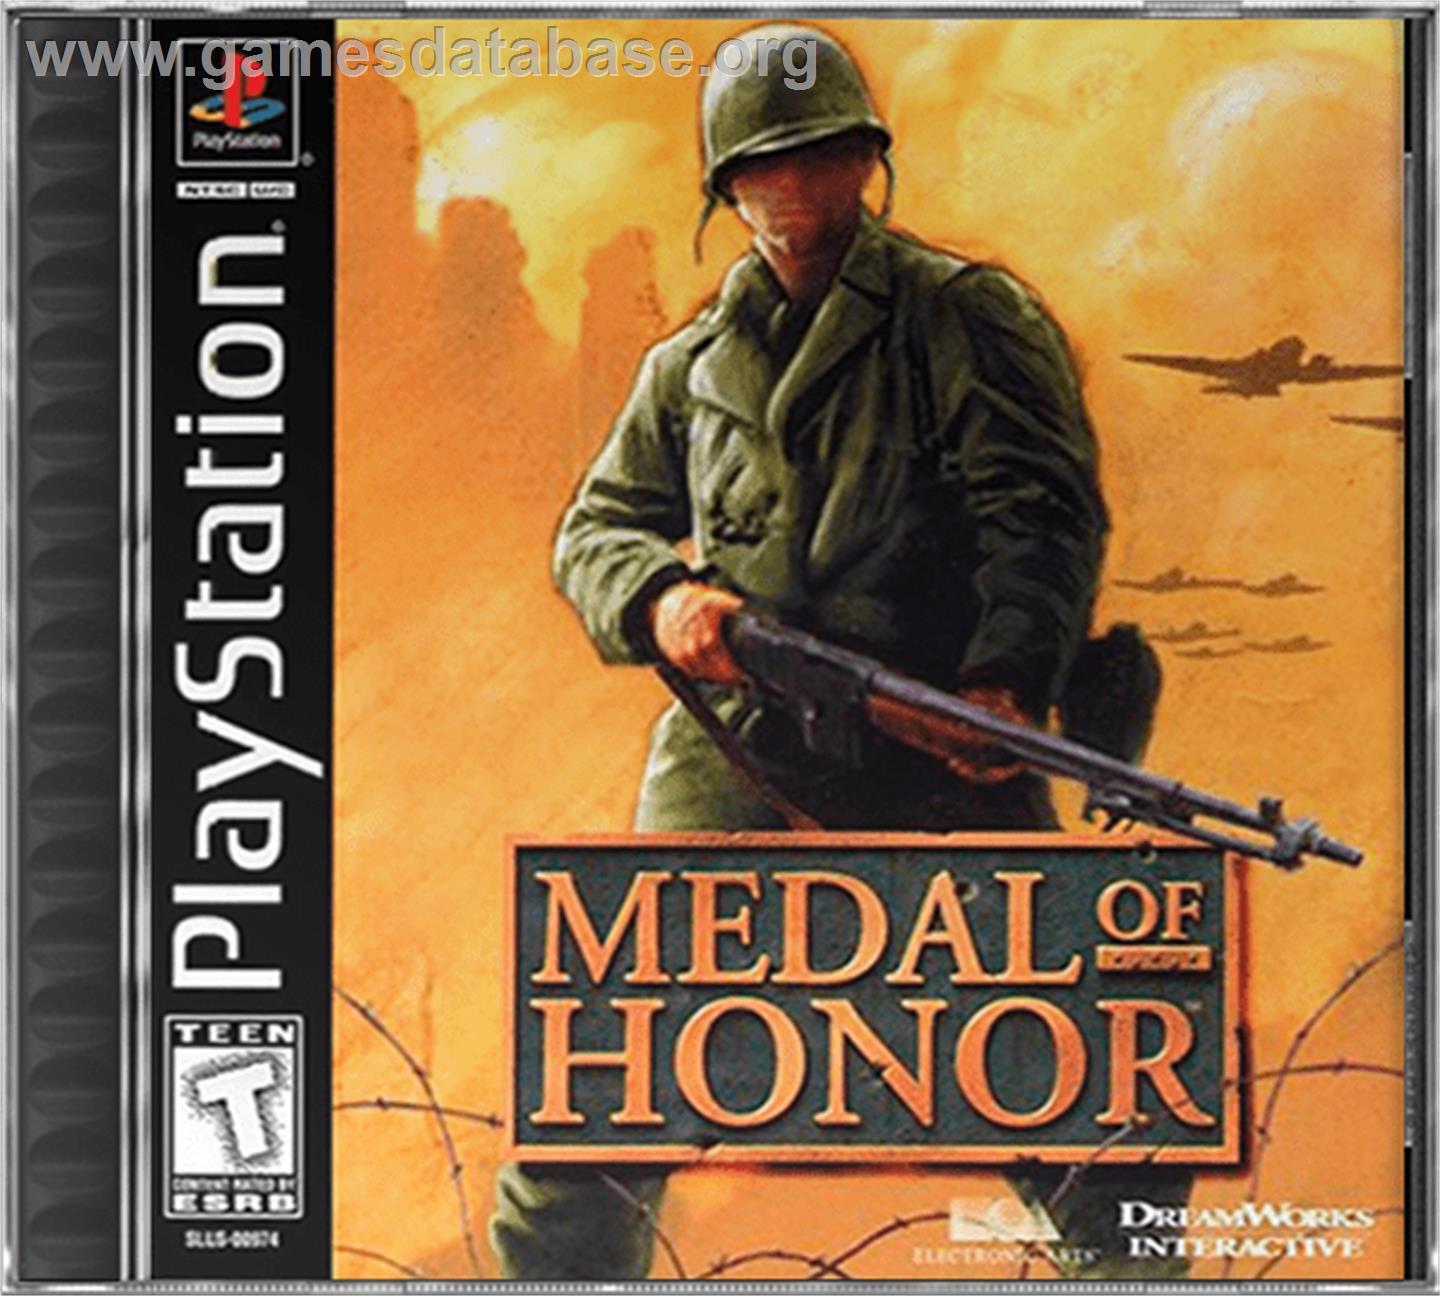 Medal of Honor / Medal of Honor: Underground - Sony Playstation - Artwork - Box